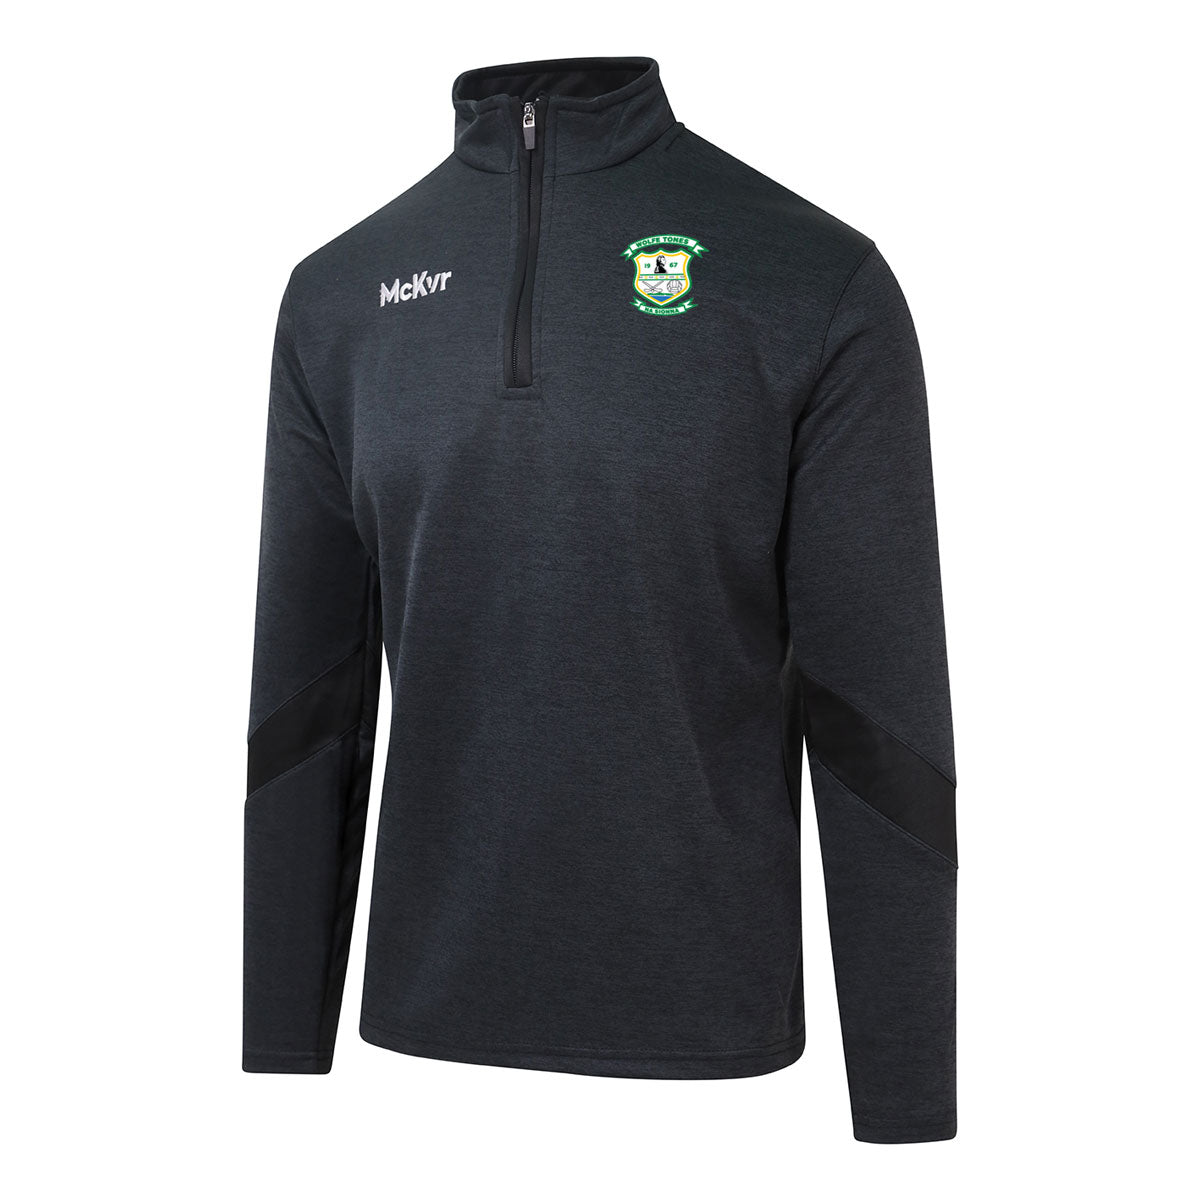 Mc Keever Wolfe Tones Na Sionna, Clare Core 22 1/4 Zip Top - Adult - Black